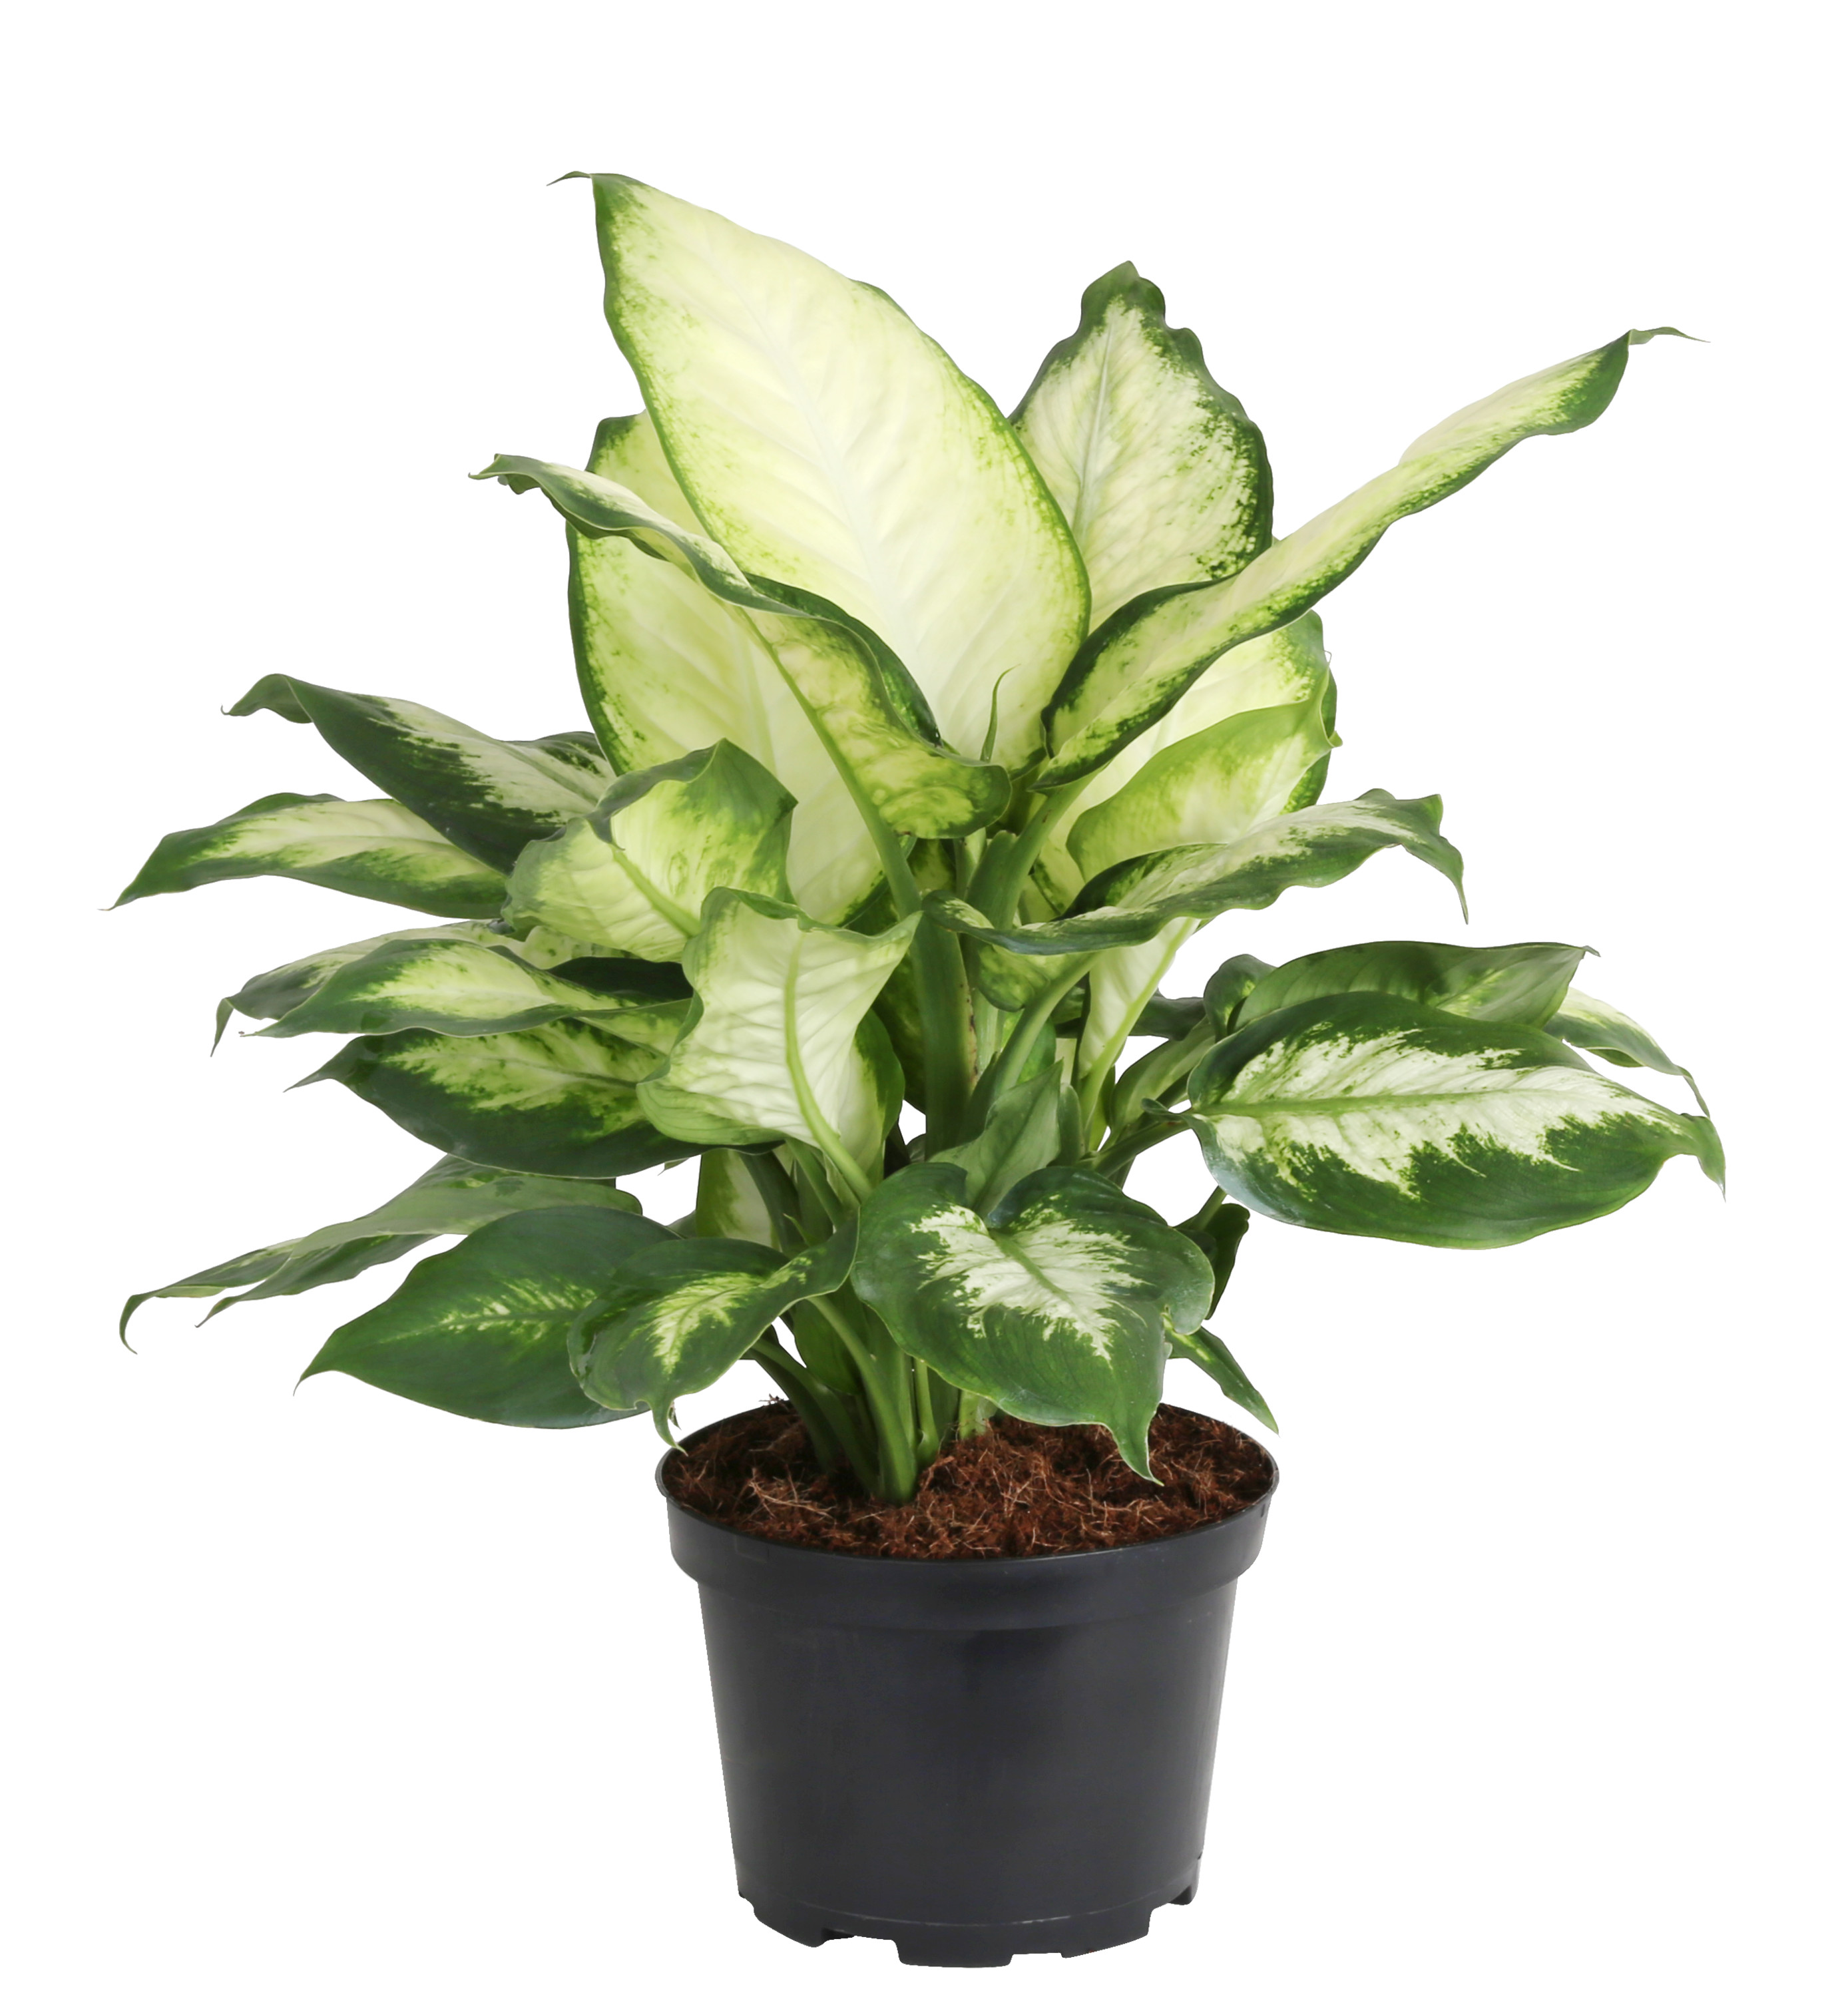 Costa Farms Live Indoor 12in. Tall Multicolor Dieffenbachia, Indirect Sunlight, Plant in 6in. Grower Pot - image 1 of 10